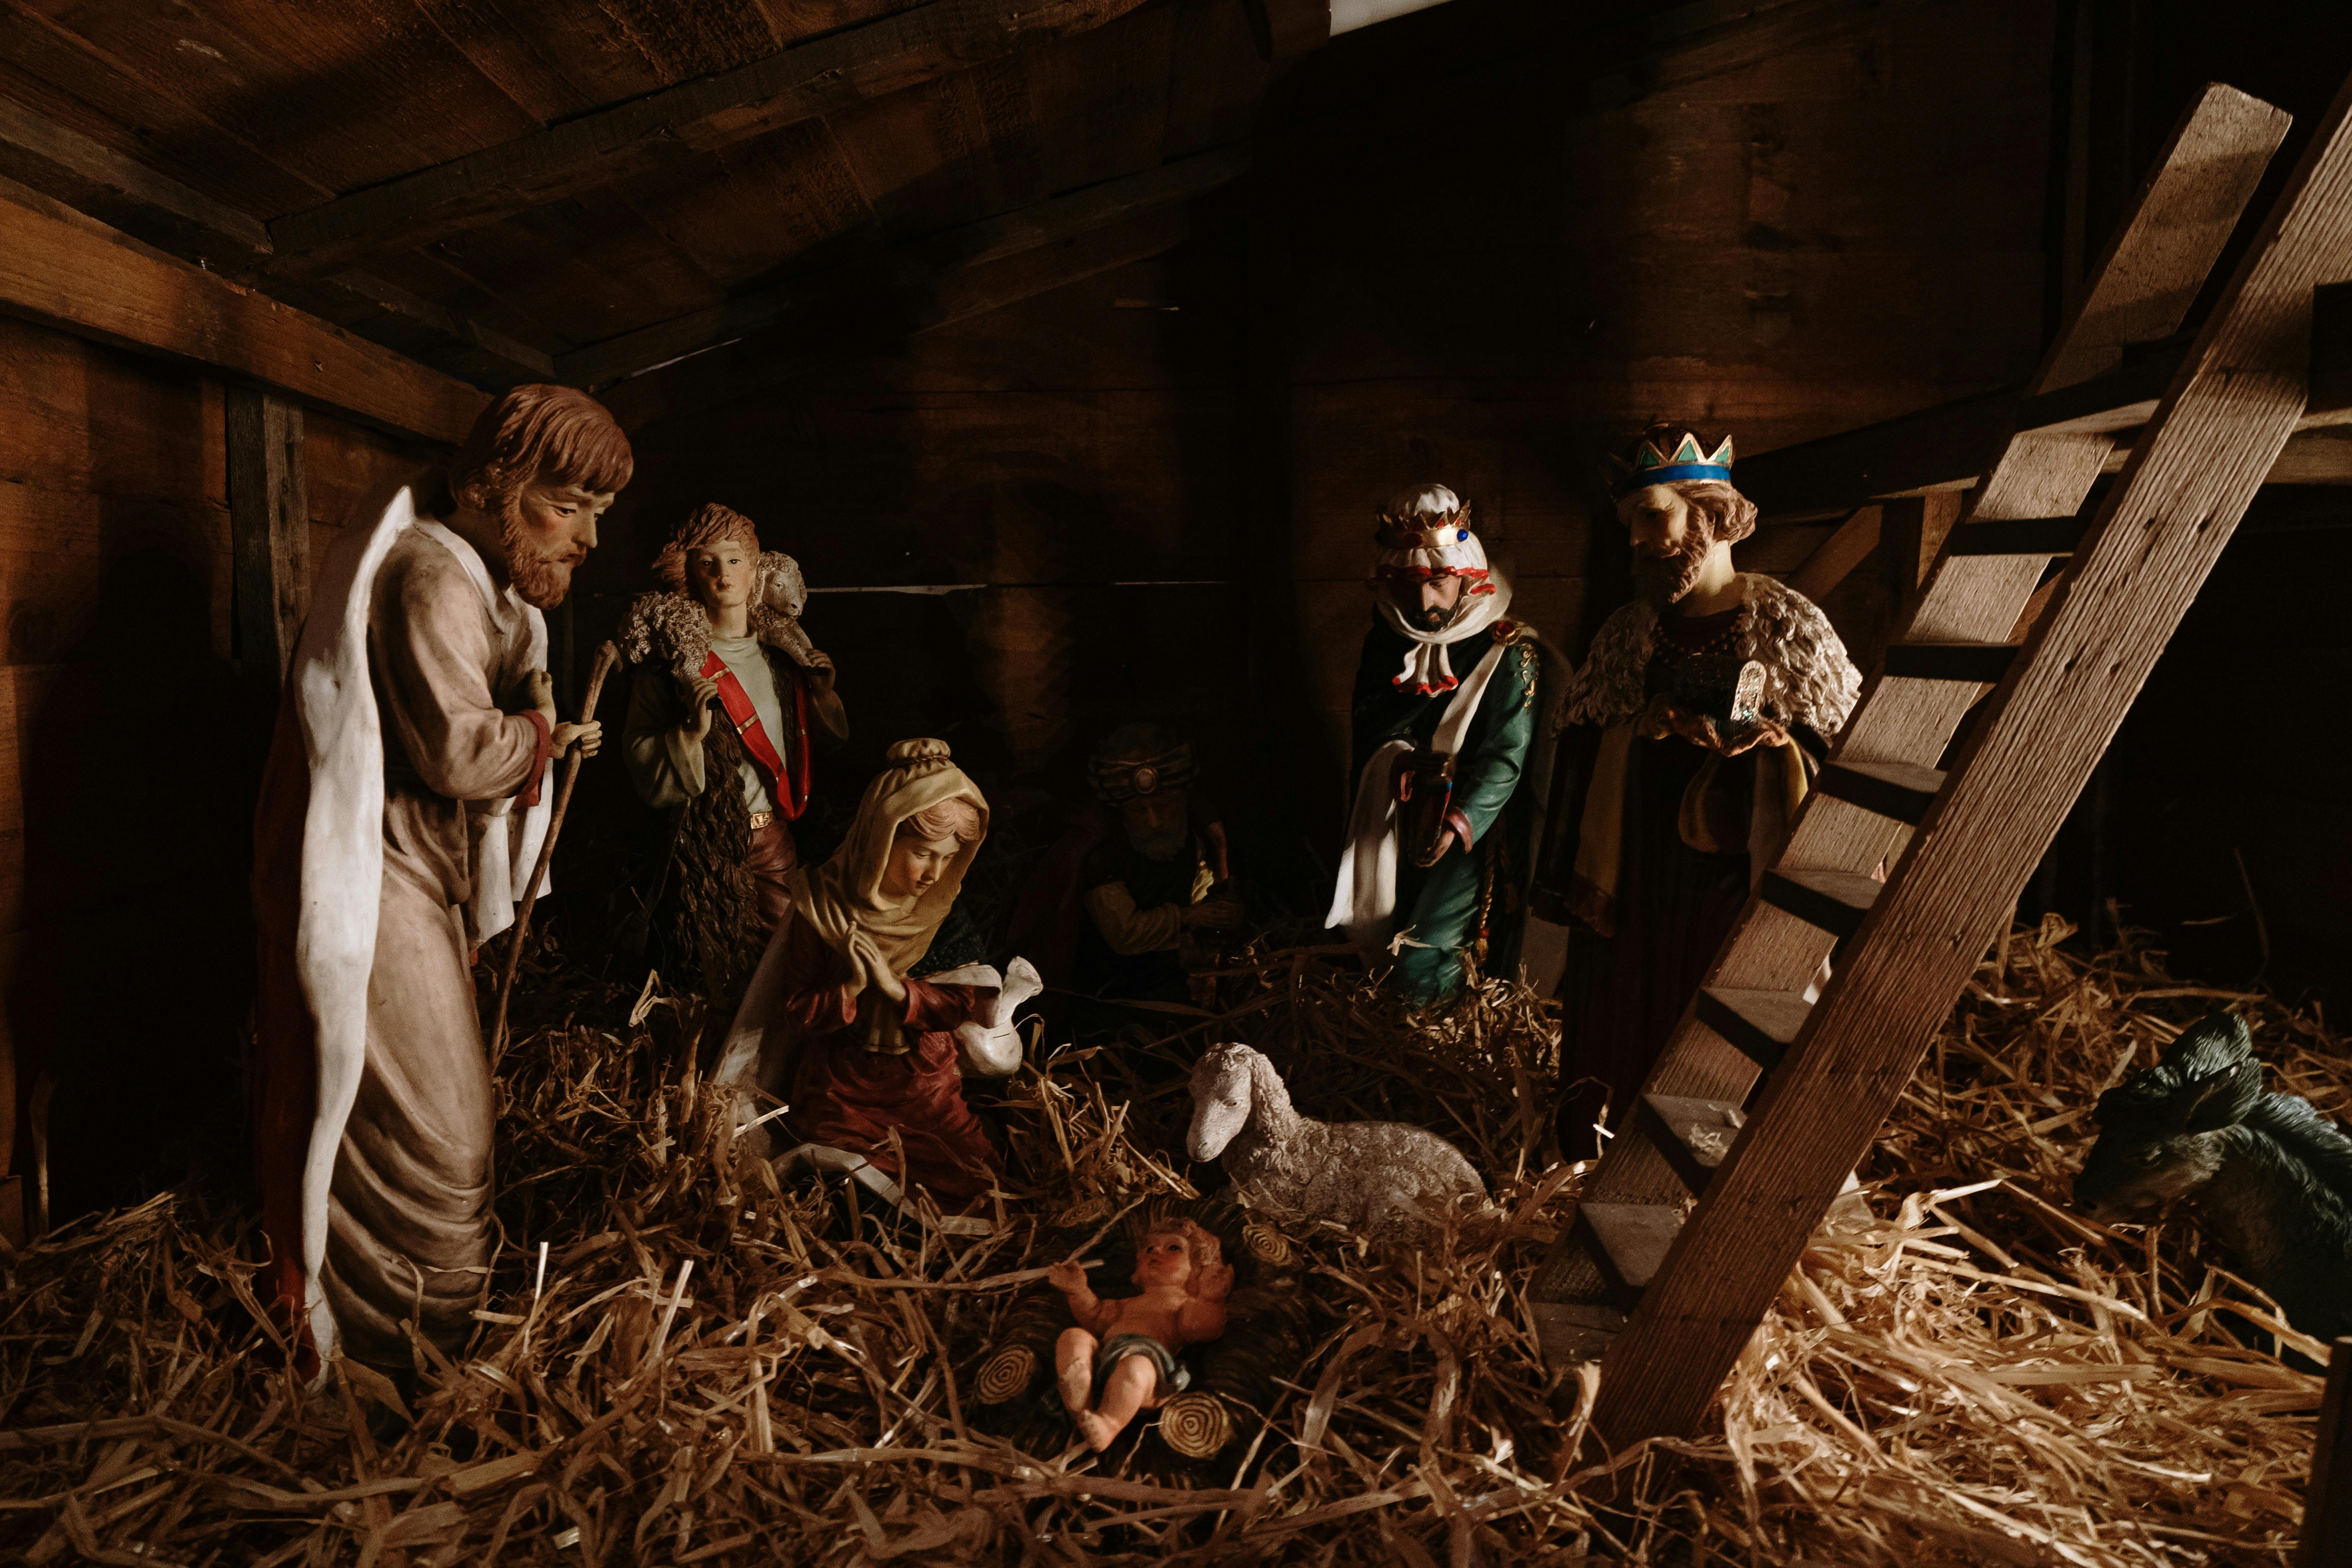 How Old Was Jesus When the Wise Men Came?